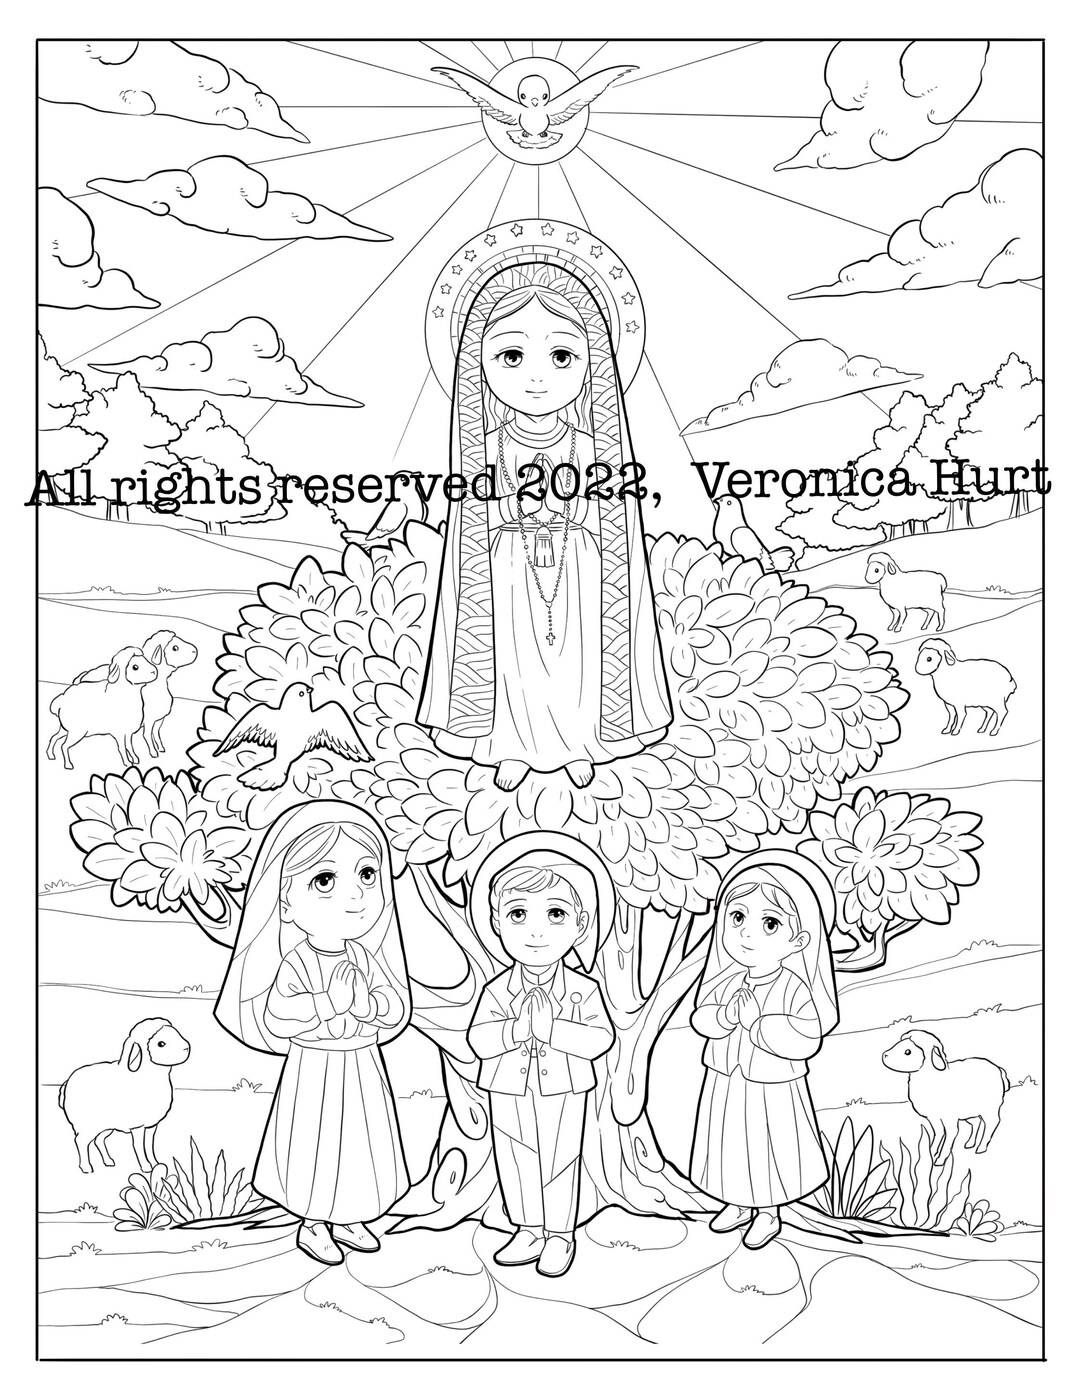 Our lady of fatima coloring page saints francisco and jacinta marto coloring page for kids and adults instant download